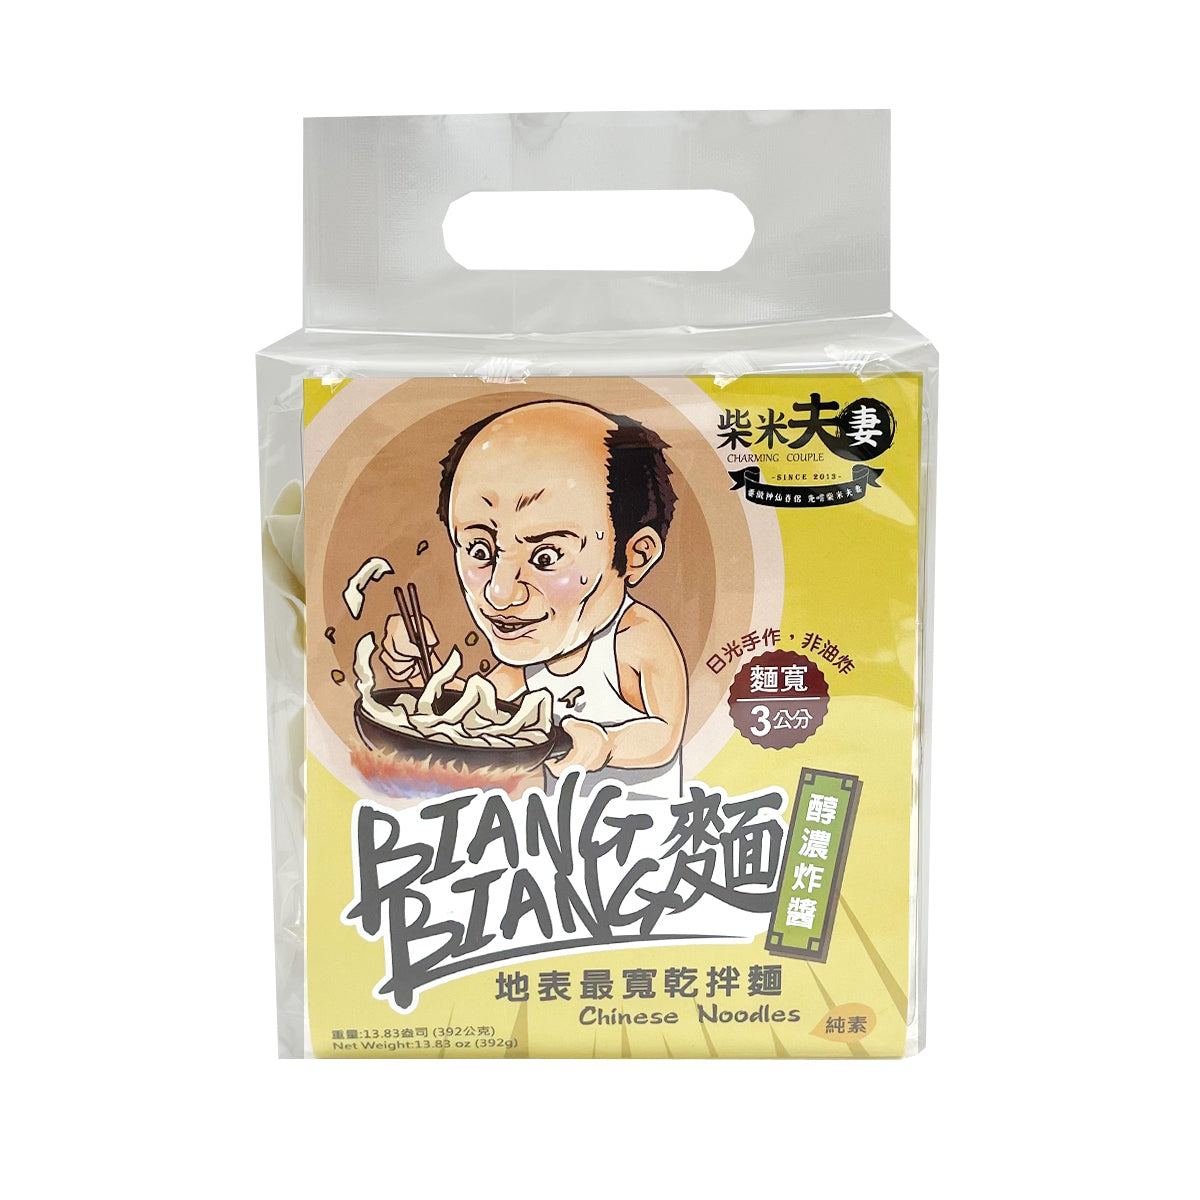 【BIANG BIANG】CHARMING COUPLE The Widest Dry Noodles, Mellow Fried Sauce Flavor (Vegan) 392g 4pcs